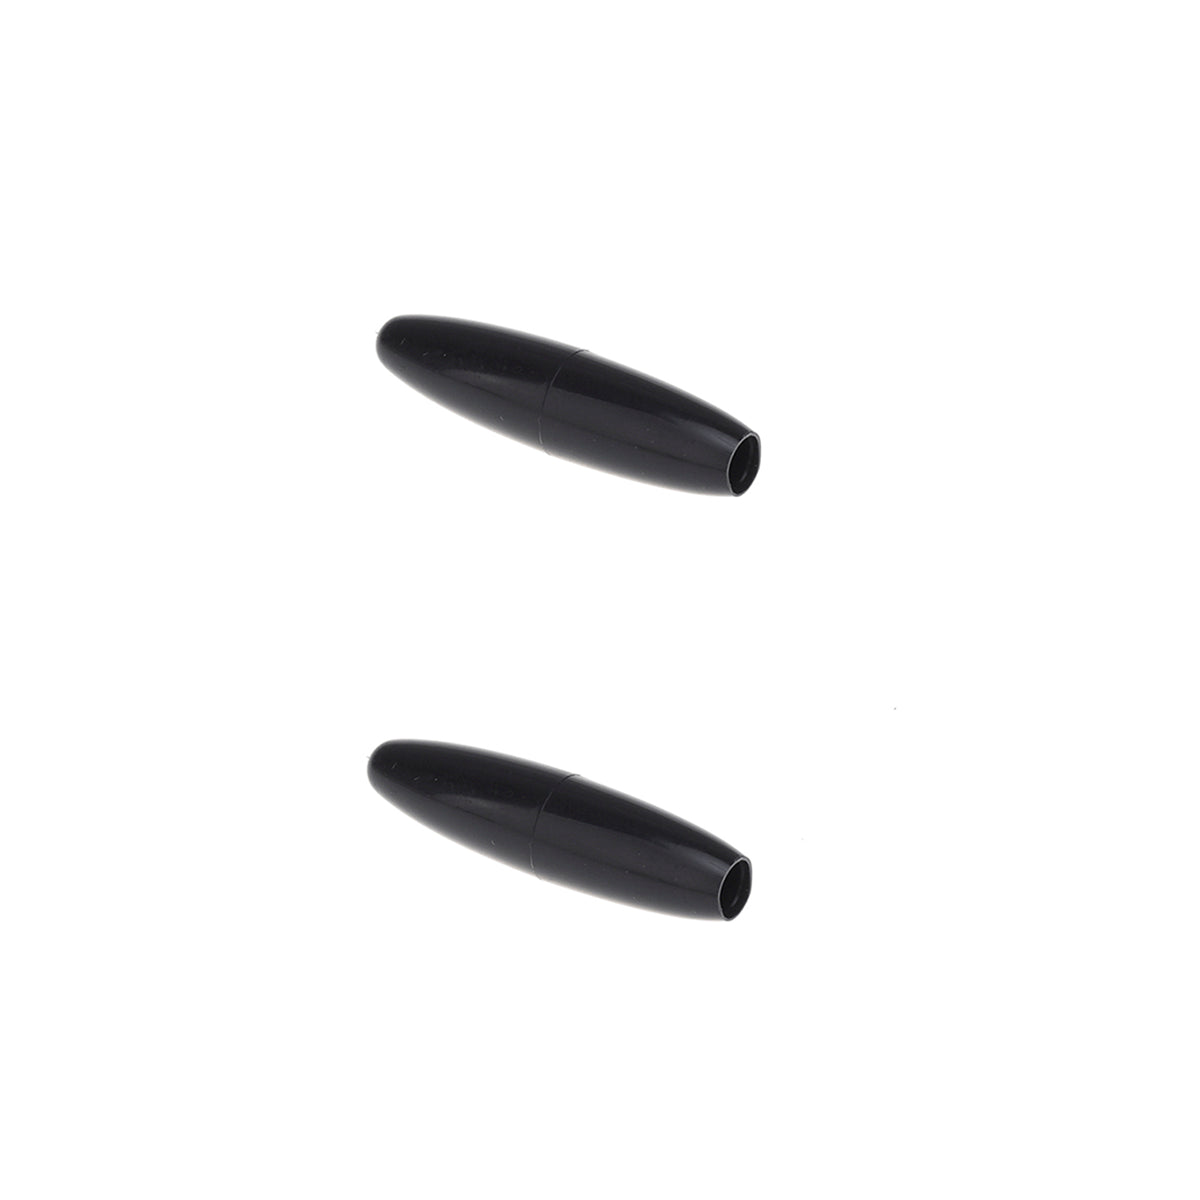 Musiclily Pro Inch Size Plastic Tremolo Arm Tips for USA Strat  Style Guitar, Black (2 Pieces)